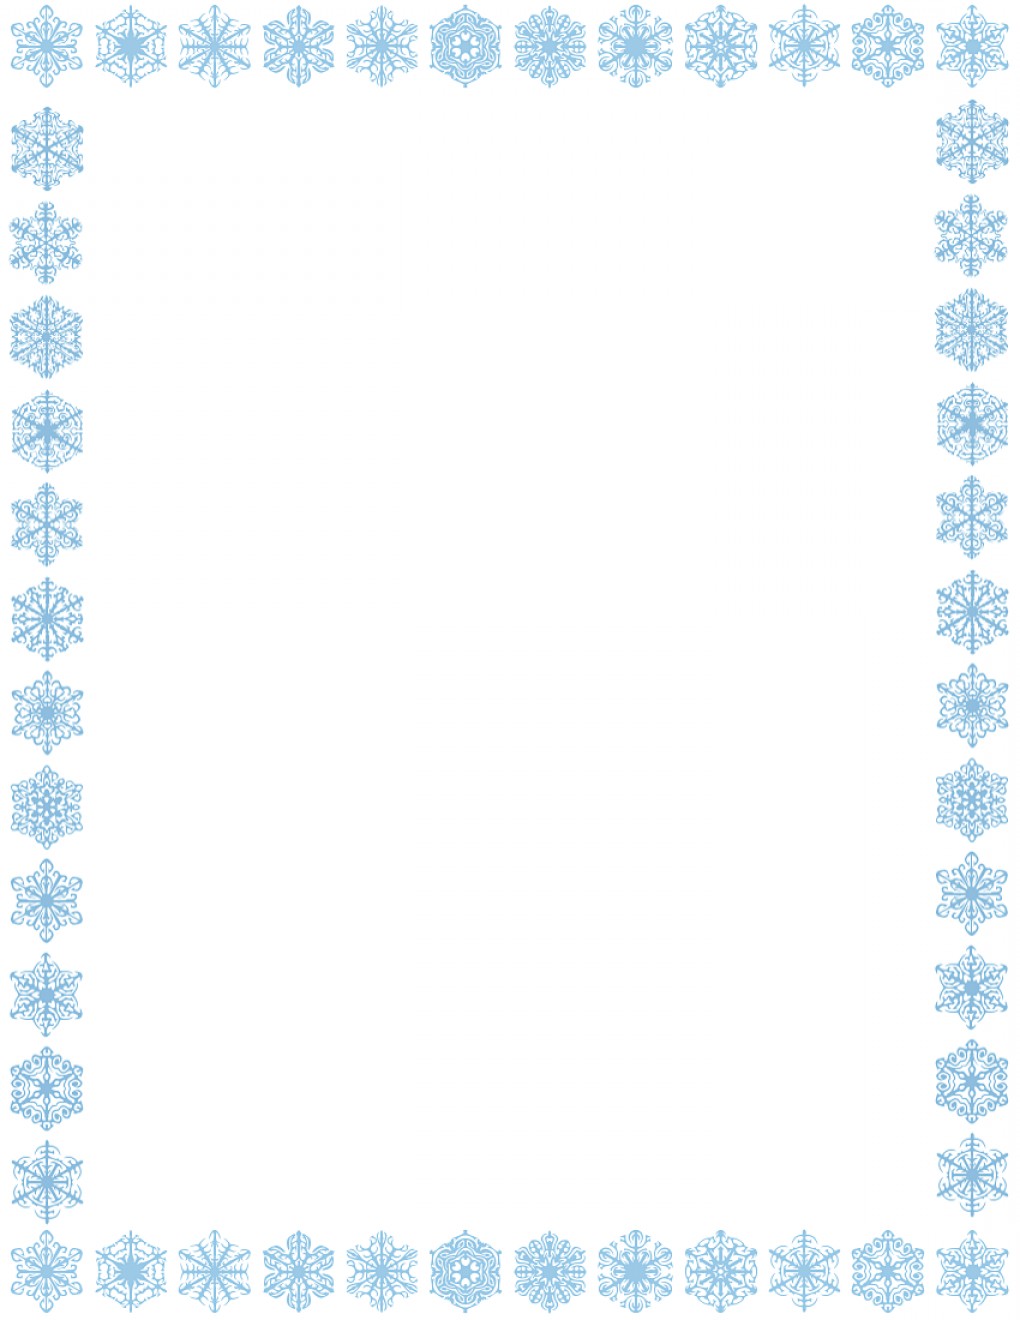 Exclusive Free Snowflake Border Clipart Graphic | ClipArTidy